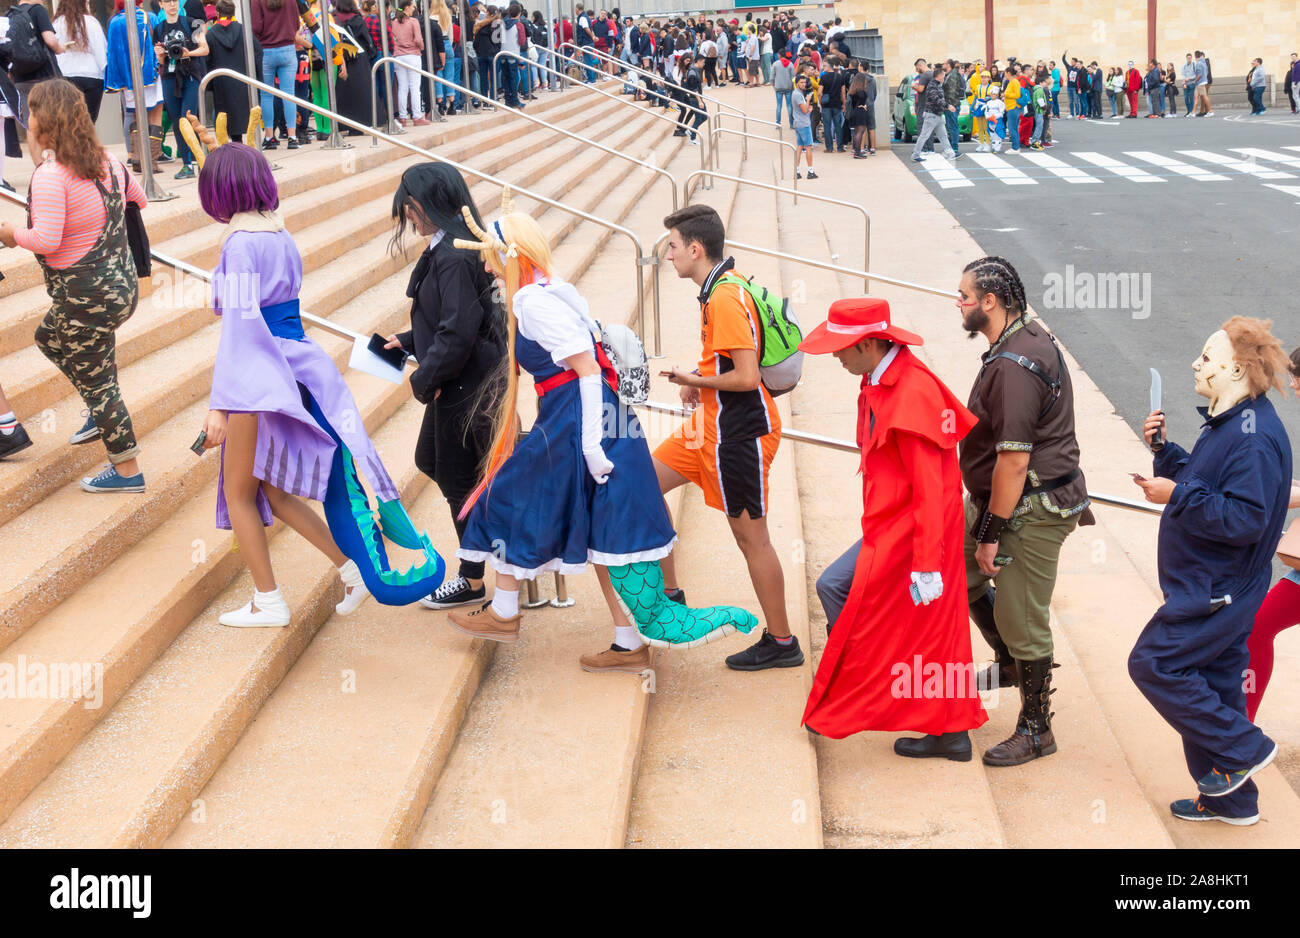 Las Palmas, Gran Canaria, Canary Islands, Spain. 9th November 2019. People  queuing to enter Manga and Comic-Can festival in Las Palmas on Gran  Canaria. Credit: ALAN DAWSON/Alamy Live News Stock Photo -